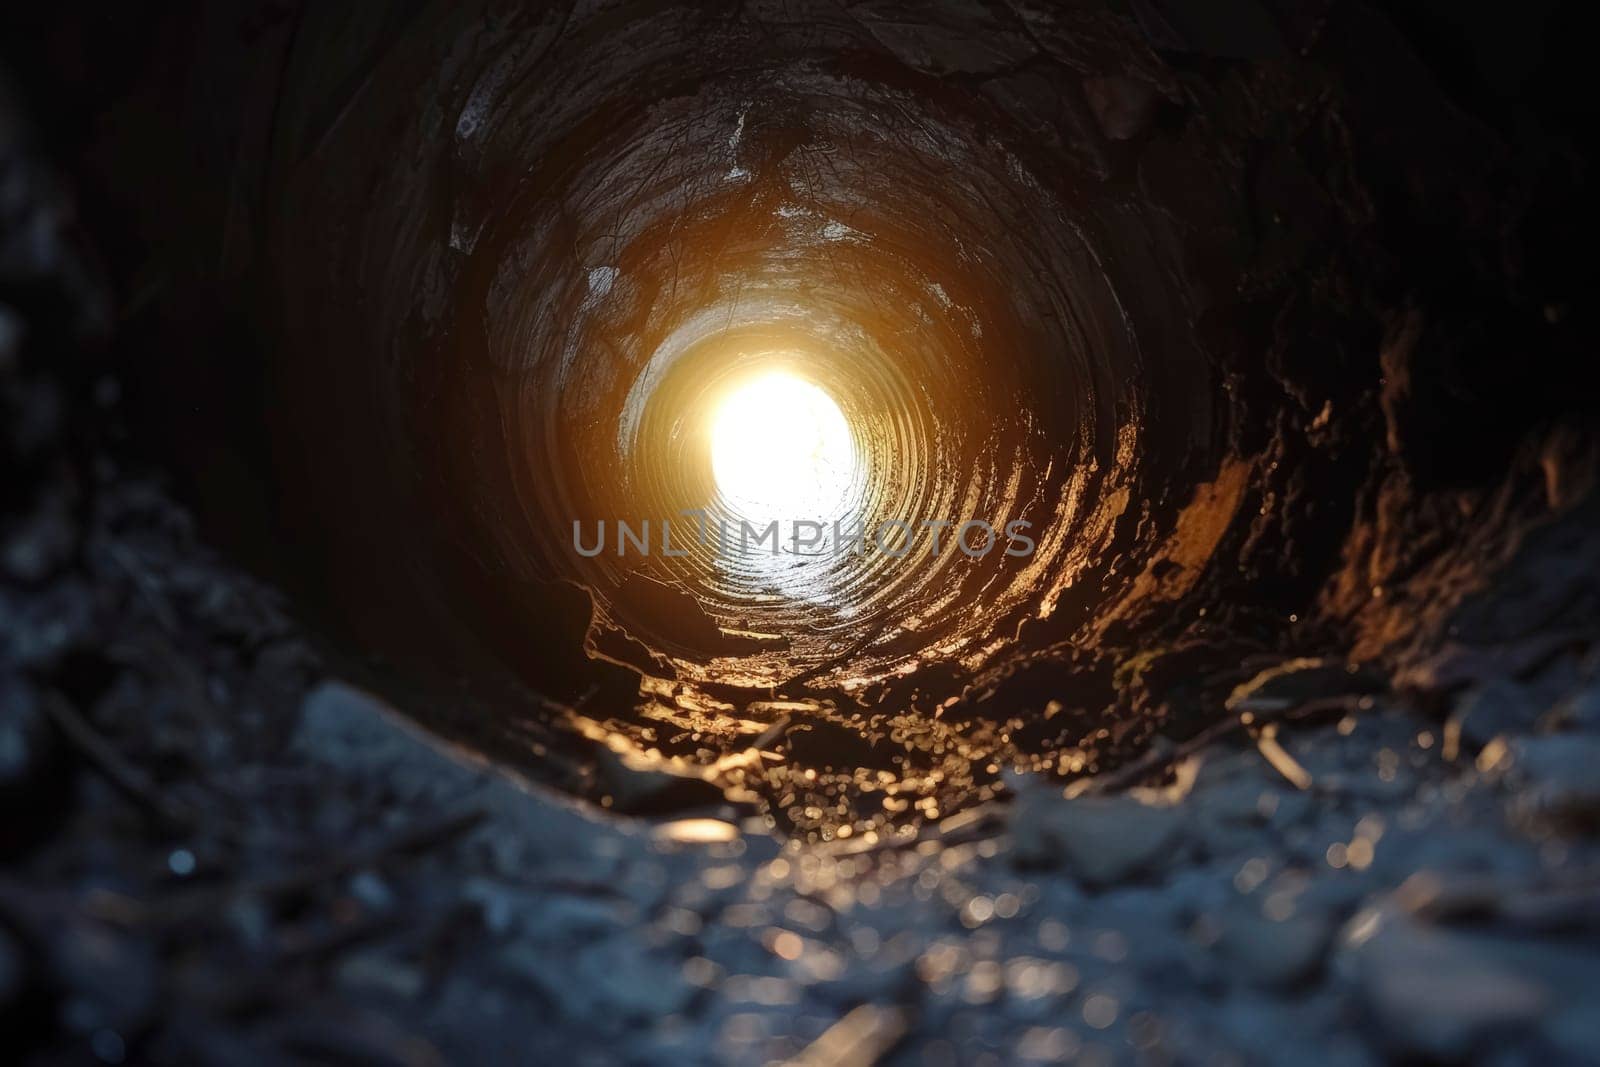 A metaphorical representation of hope, with sunlight streaming through the end of a rugged tunnel. The journey through darkness leading to a bright exit symbolizes optimism